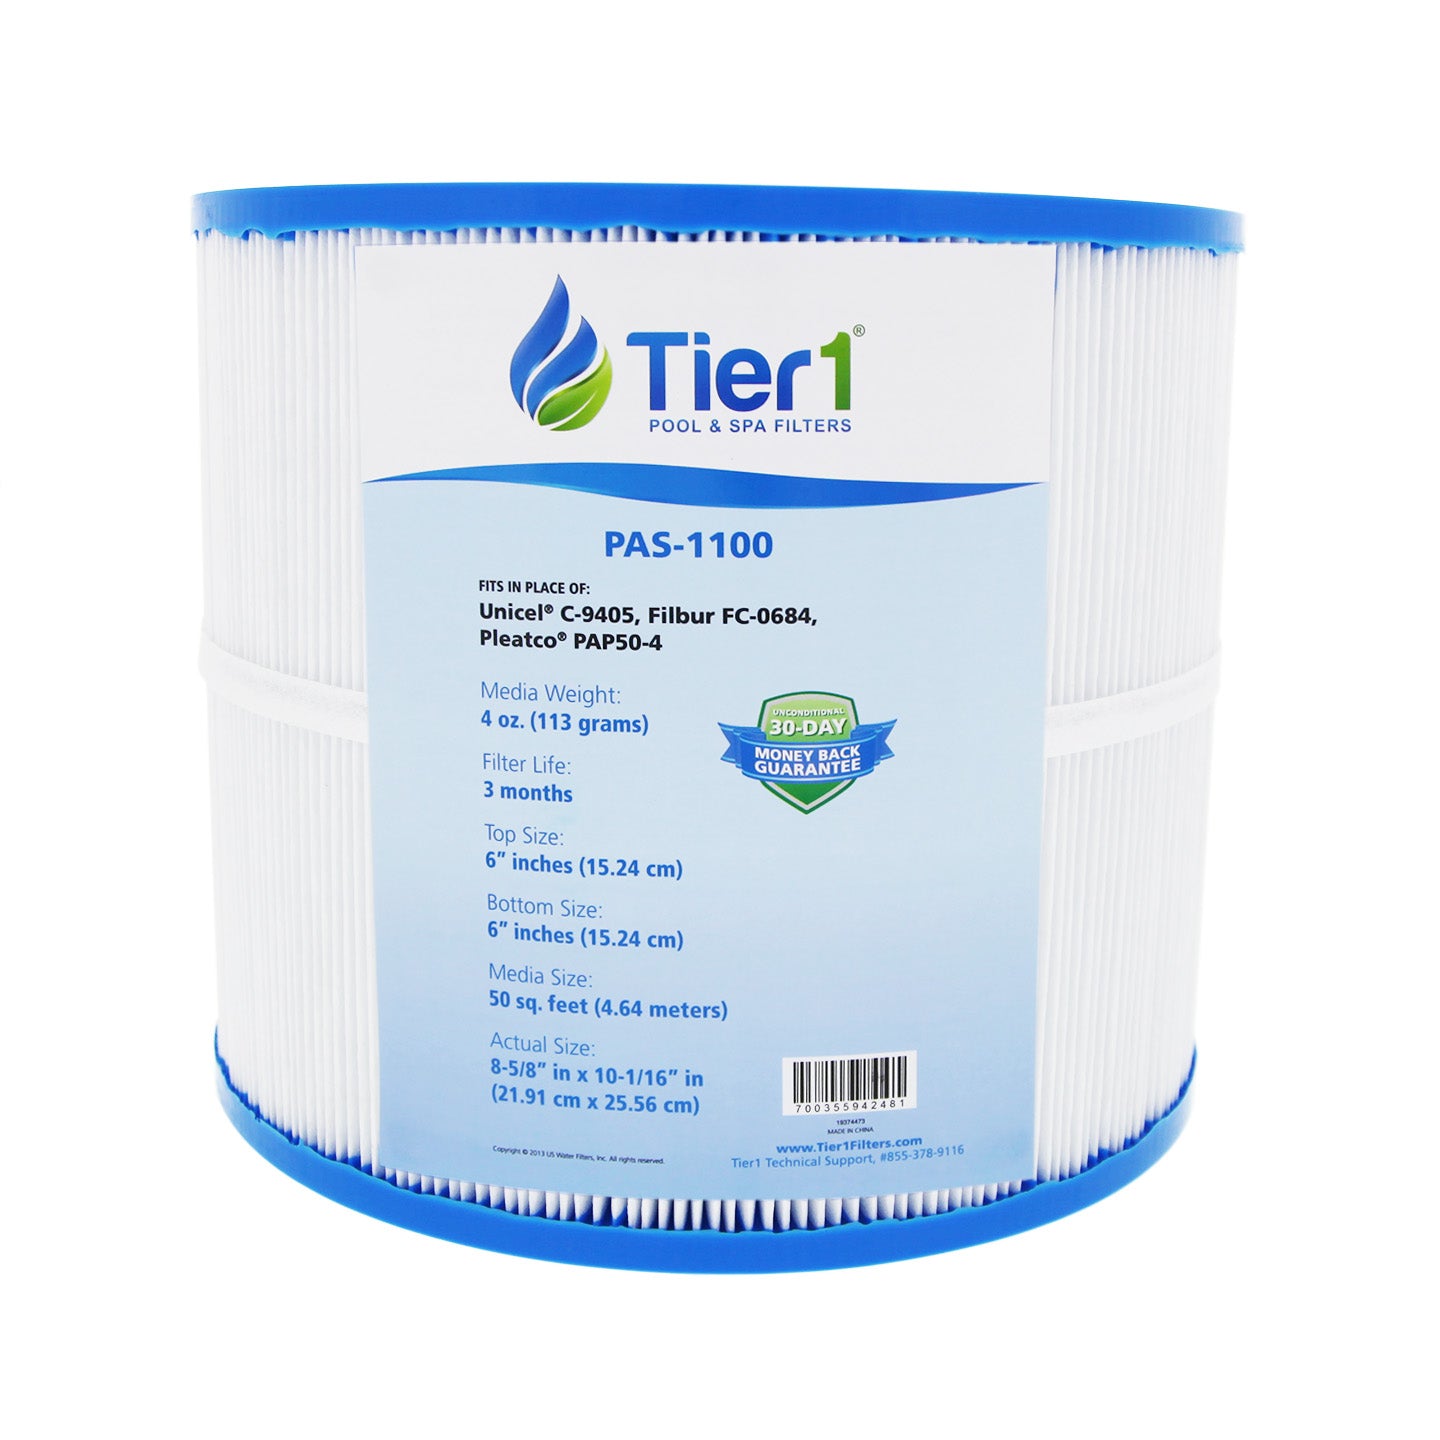 Tier1 Brand Replacement Pool and Spa Filter for R173213, 59054000 & 1561-26